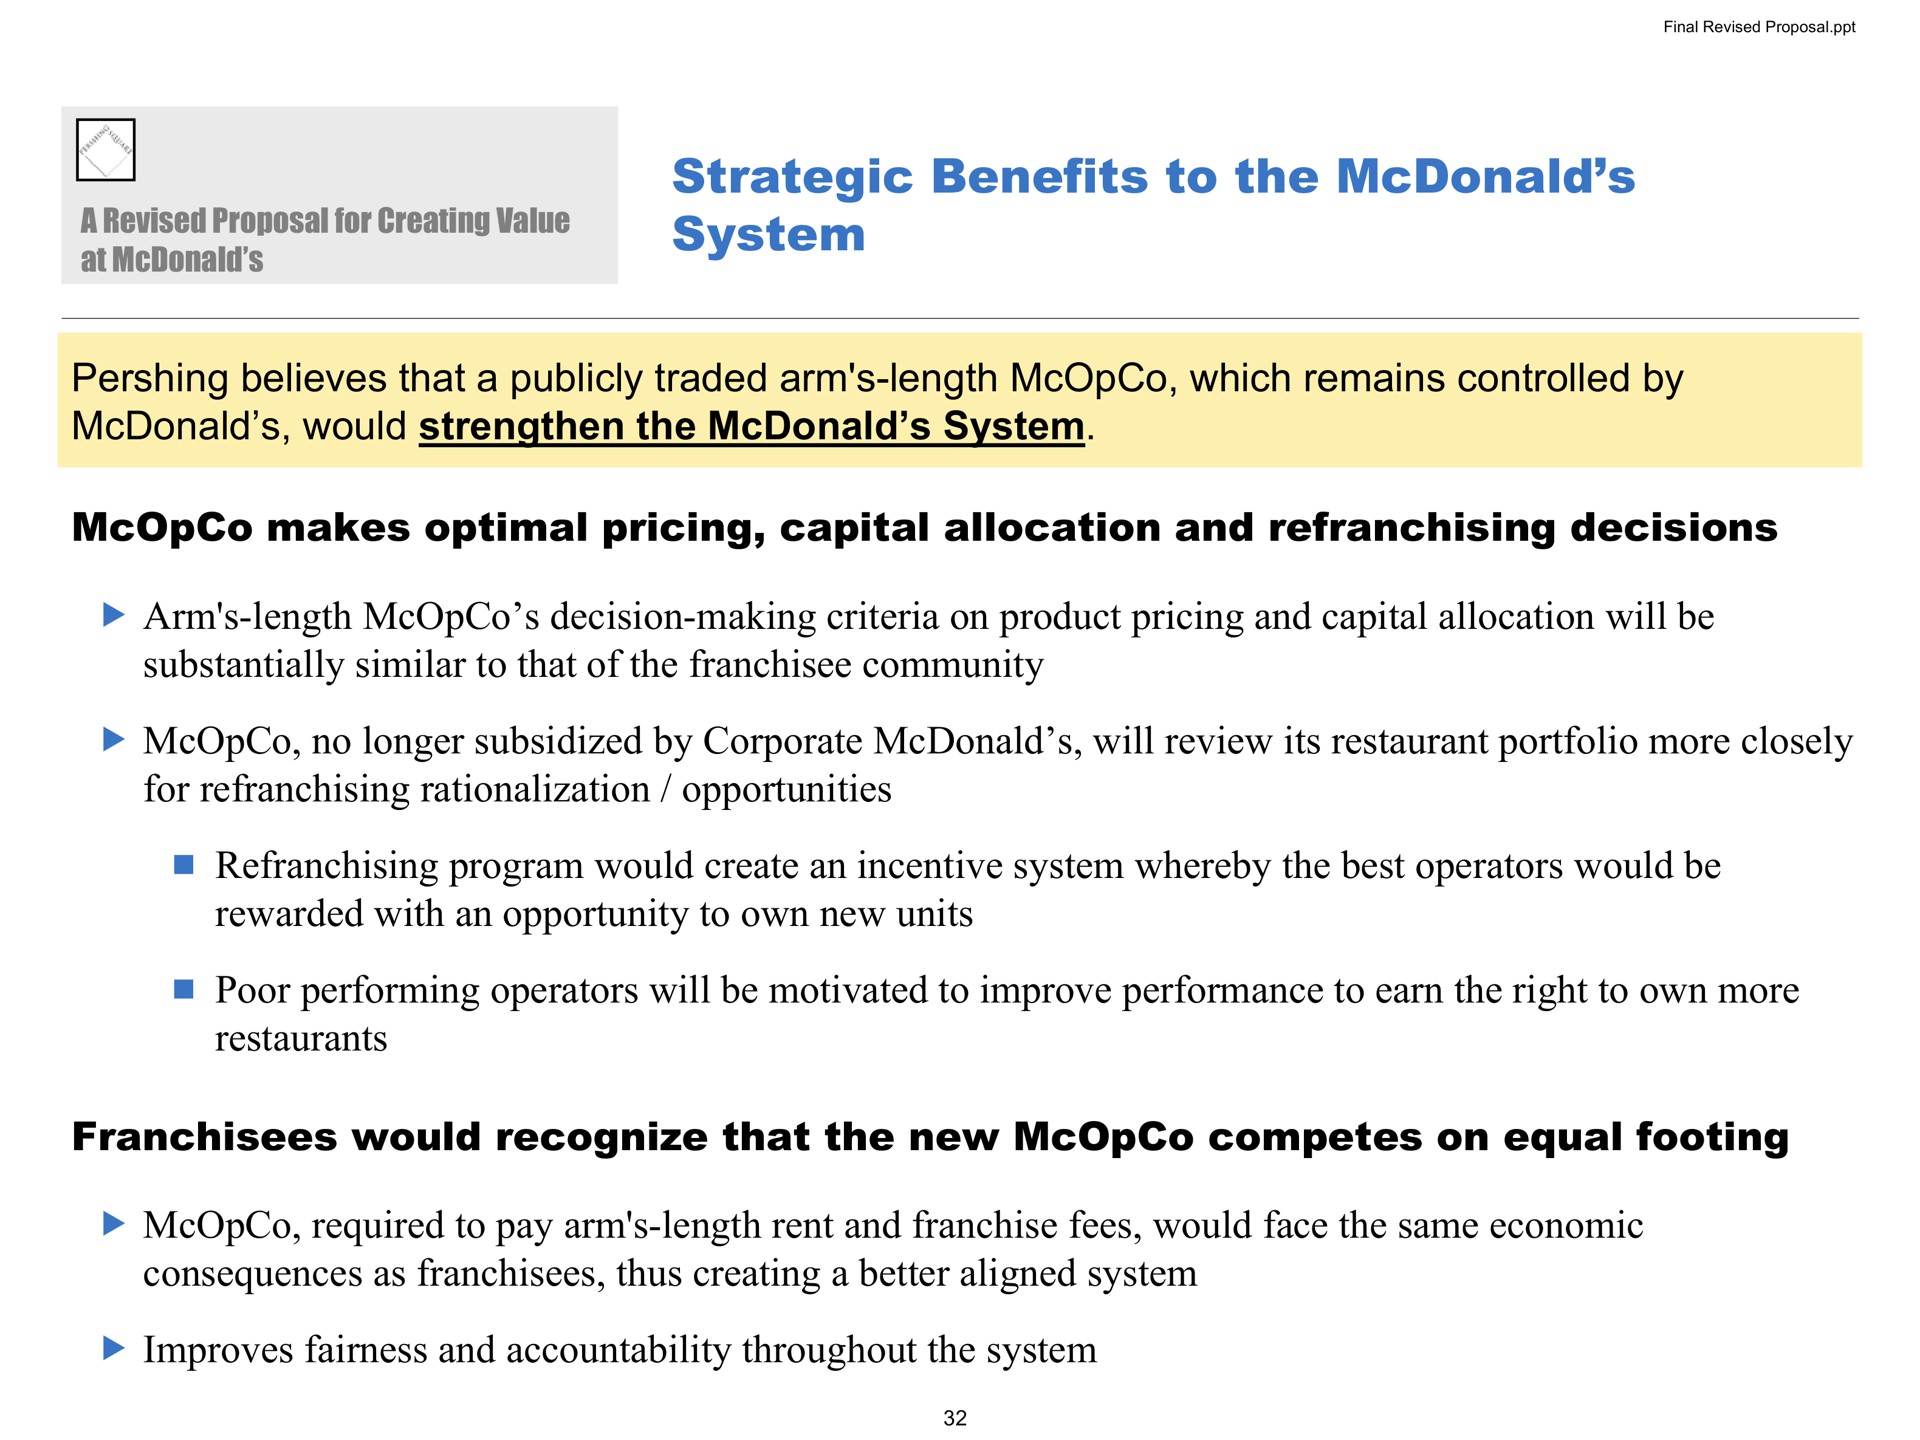 strategic benefits to the system believes that a publicly traded arm length which remains controlled by would strengthen the system makes optimal pricing capital allocation and decisions arm length decision making criteria on product pricing and capital allocation will be substantially similar to that of the community no longer subsidized by corporate will review its restaurant portfolio more closely for rationalization opportunities program would create an incentive system whereby the best operators would be rewarded with an opportunity to own new units poor performing operators will be motivated to improve performance to earn the right to own more restaurants franchisees would recognize that the new competes on equal footing required to pay arm length rent and franchise fees would face the same economic consequences as franchisees thus creating a better aligned system improves fairness and accountability throughout the system revised proposal value at | Pershing Square